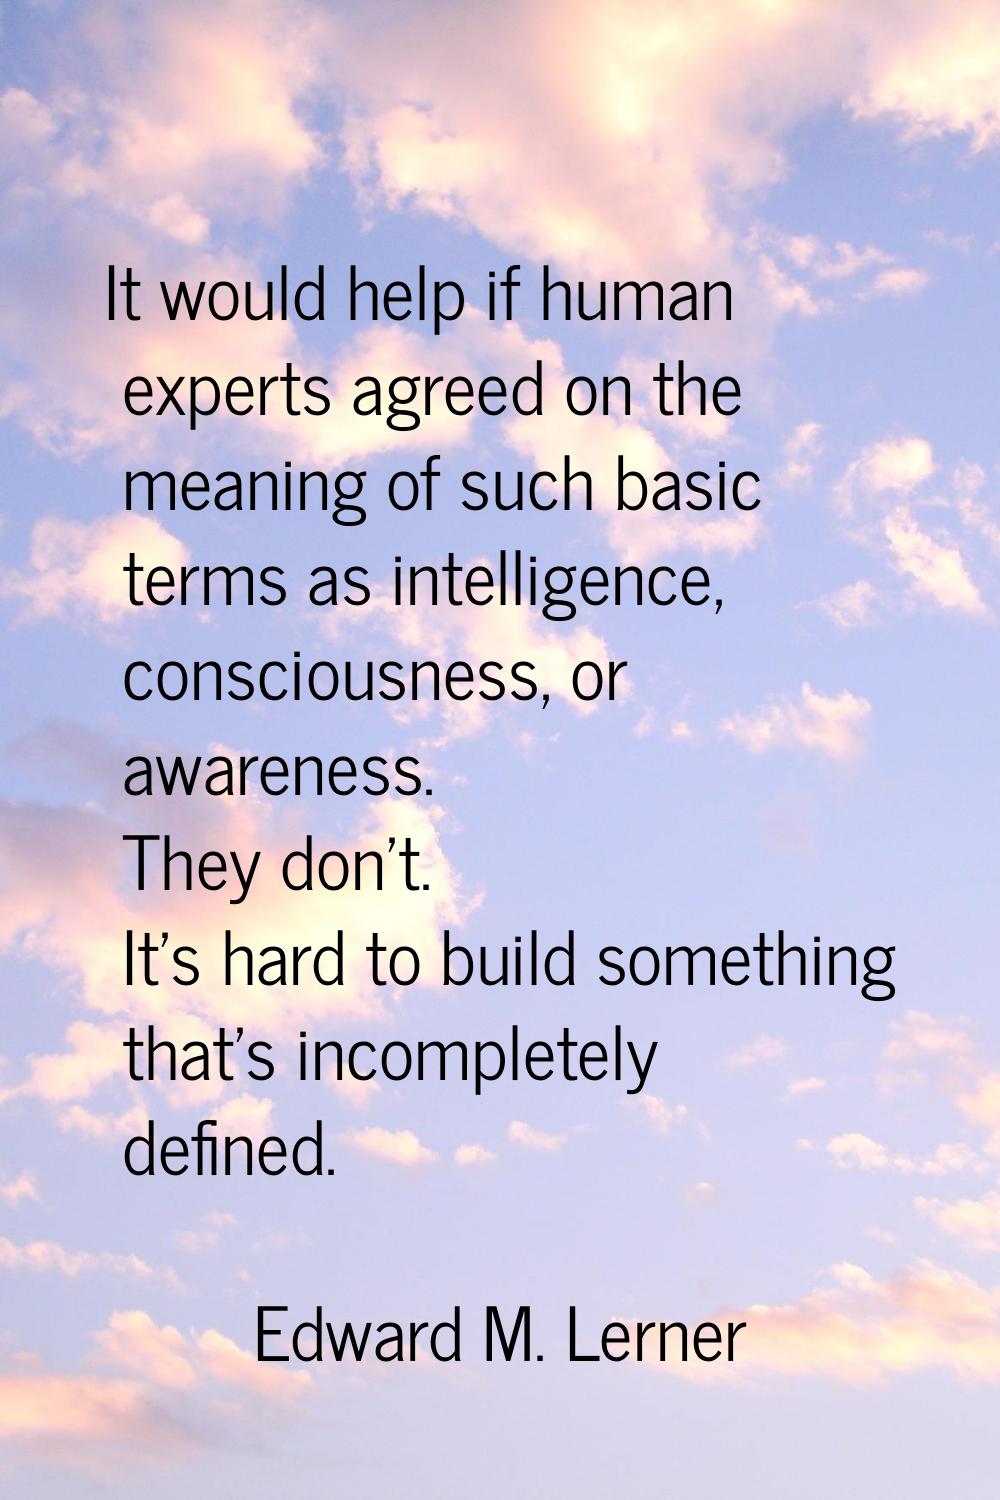 It would help if human experts agreed on the meaning of such basic terms as intelligence, conscious